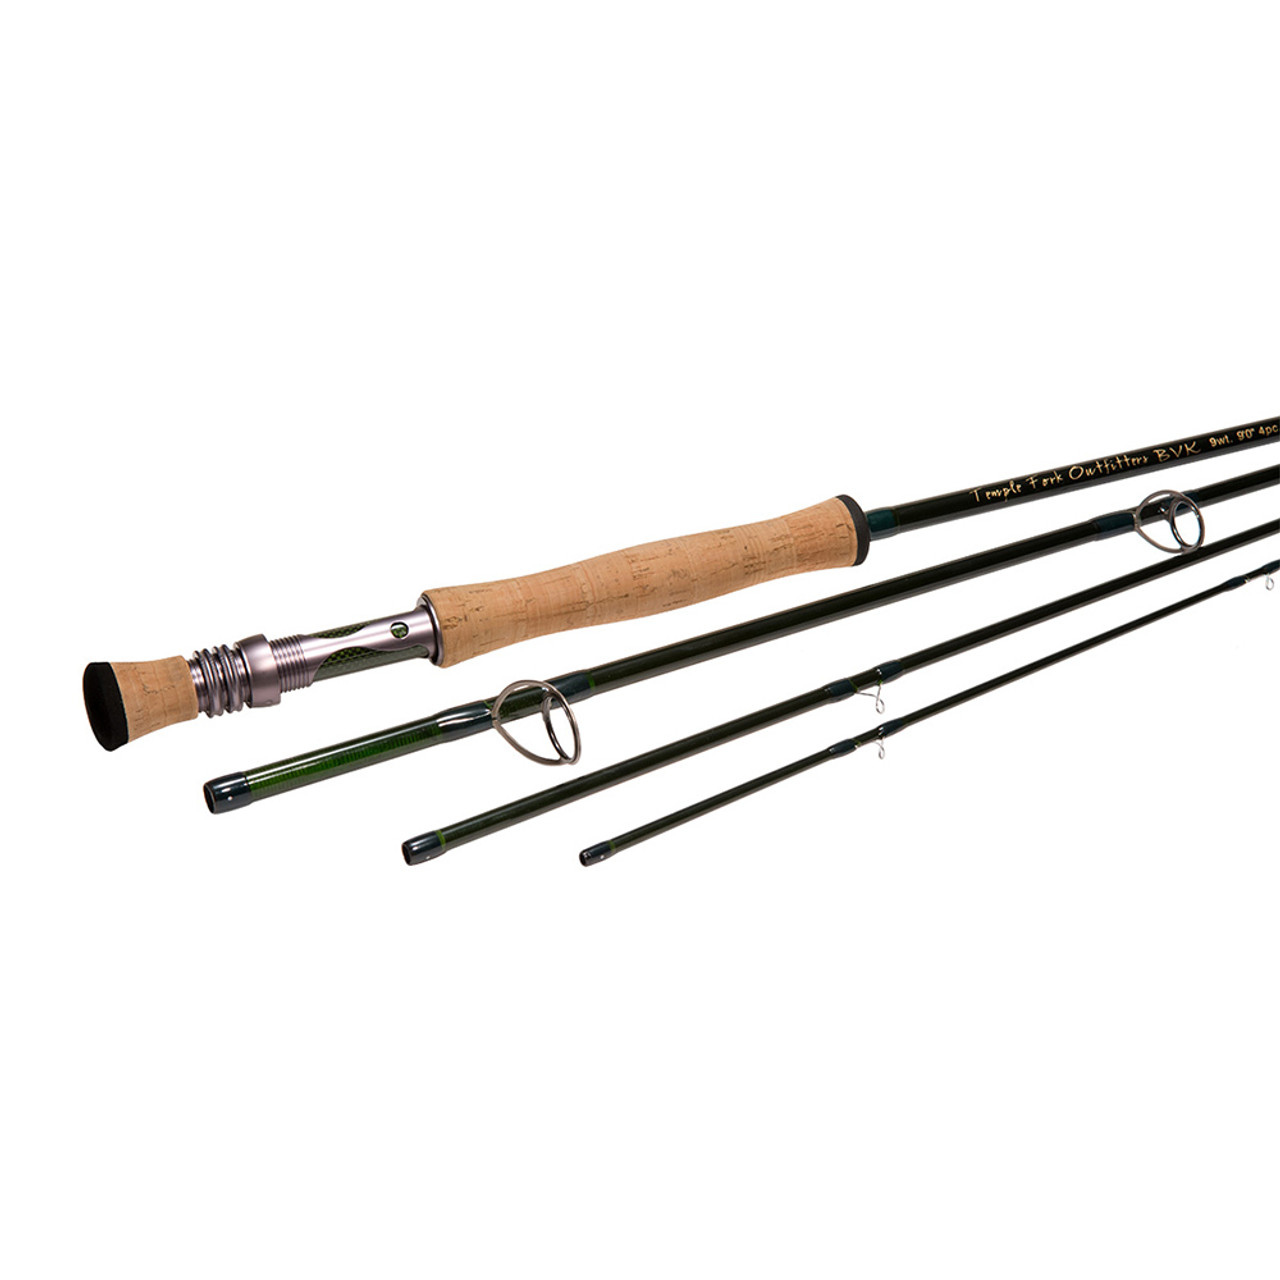  Temple Fork Outfitters Bvk